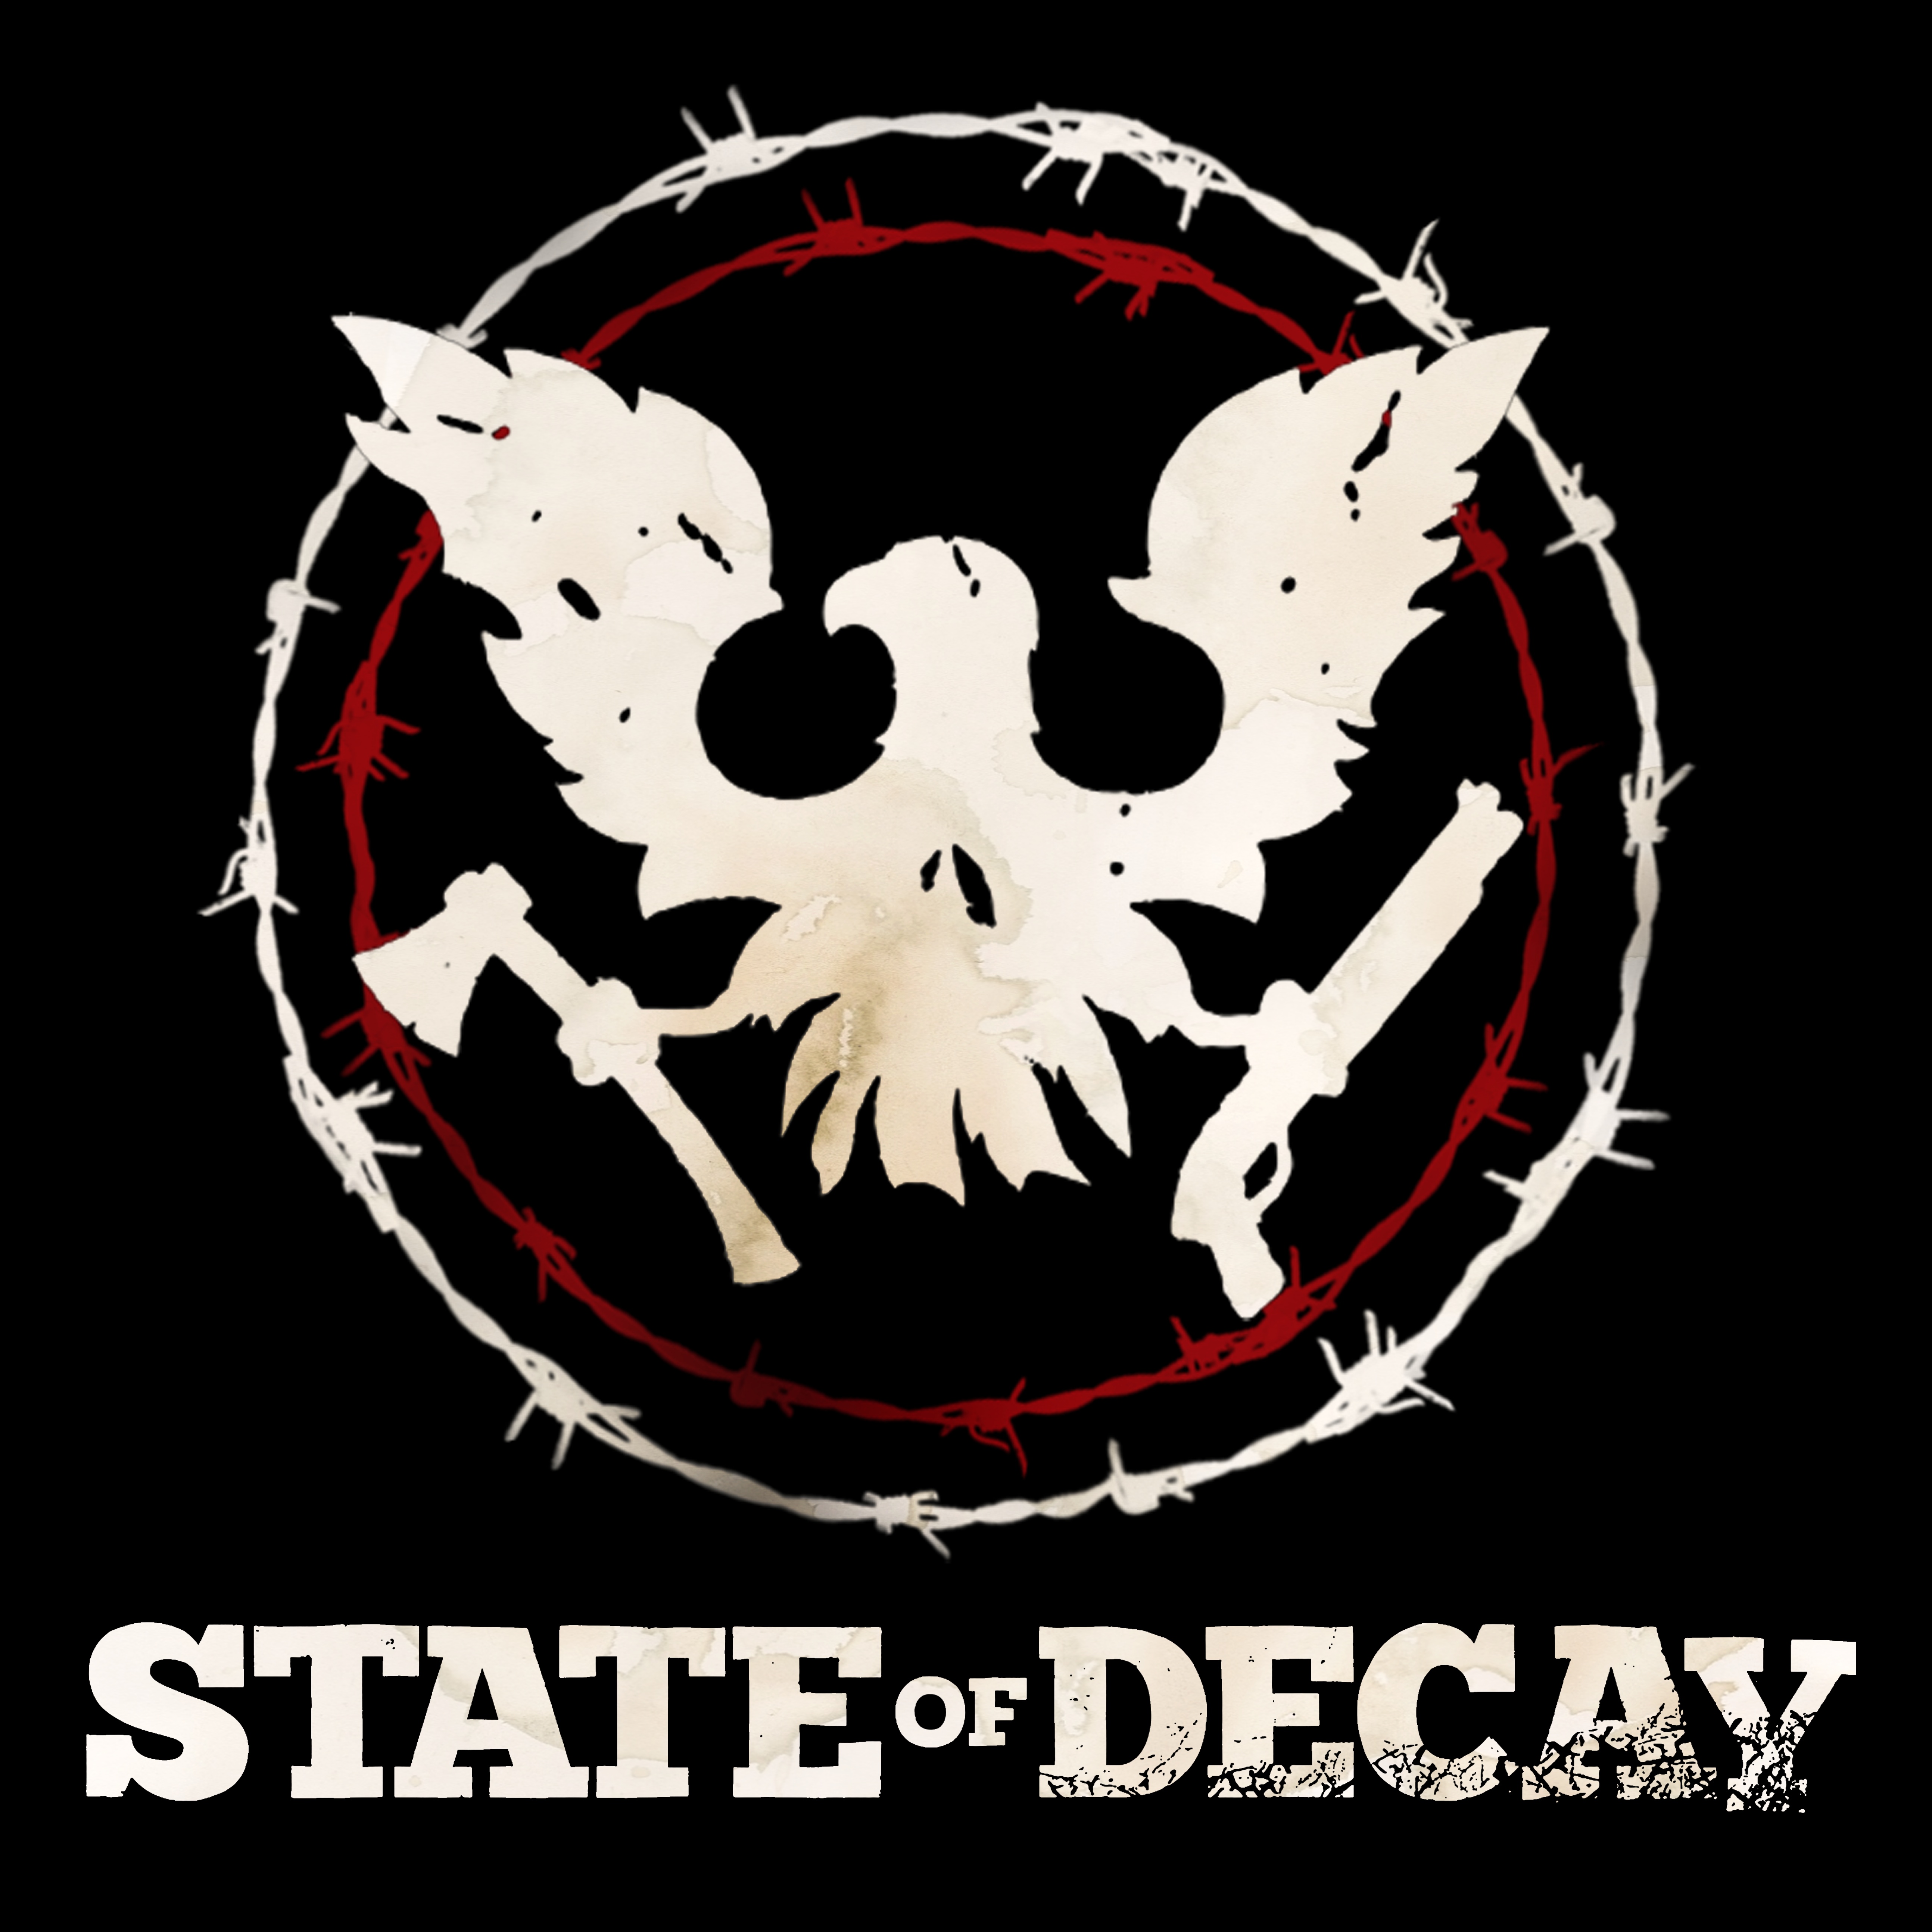 State Of Decay Art by AlwaysUndetected